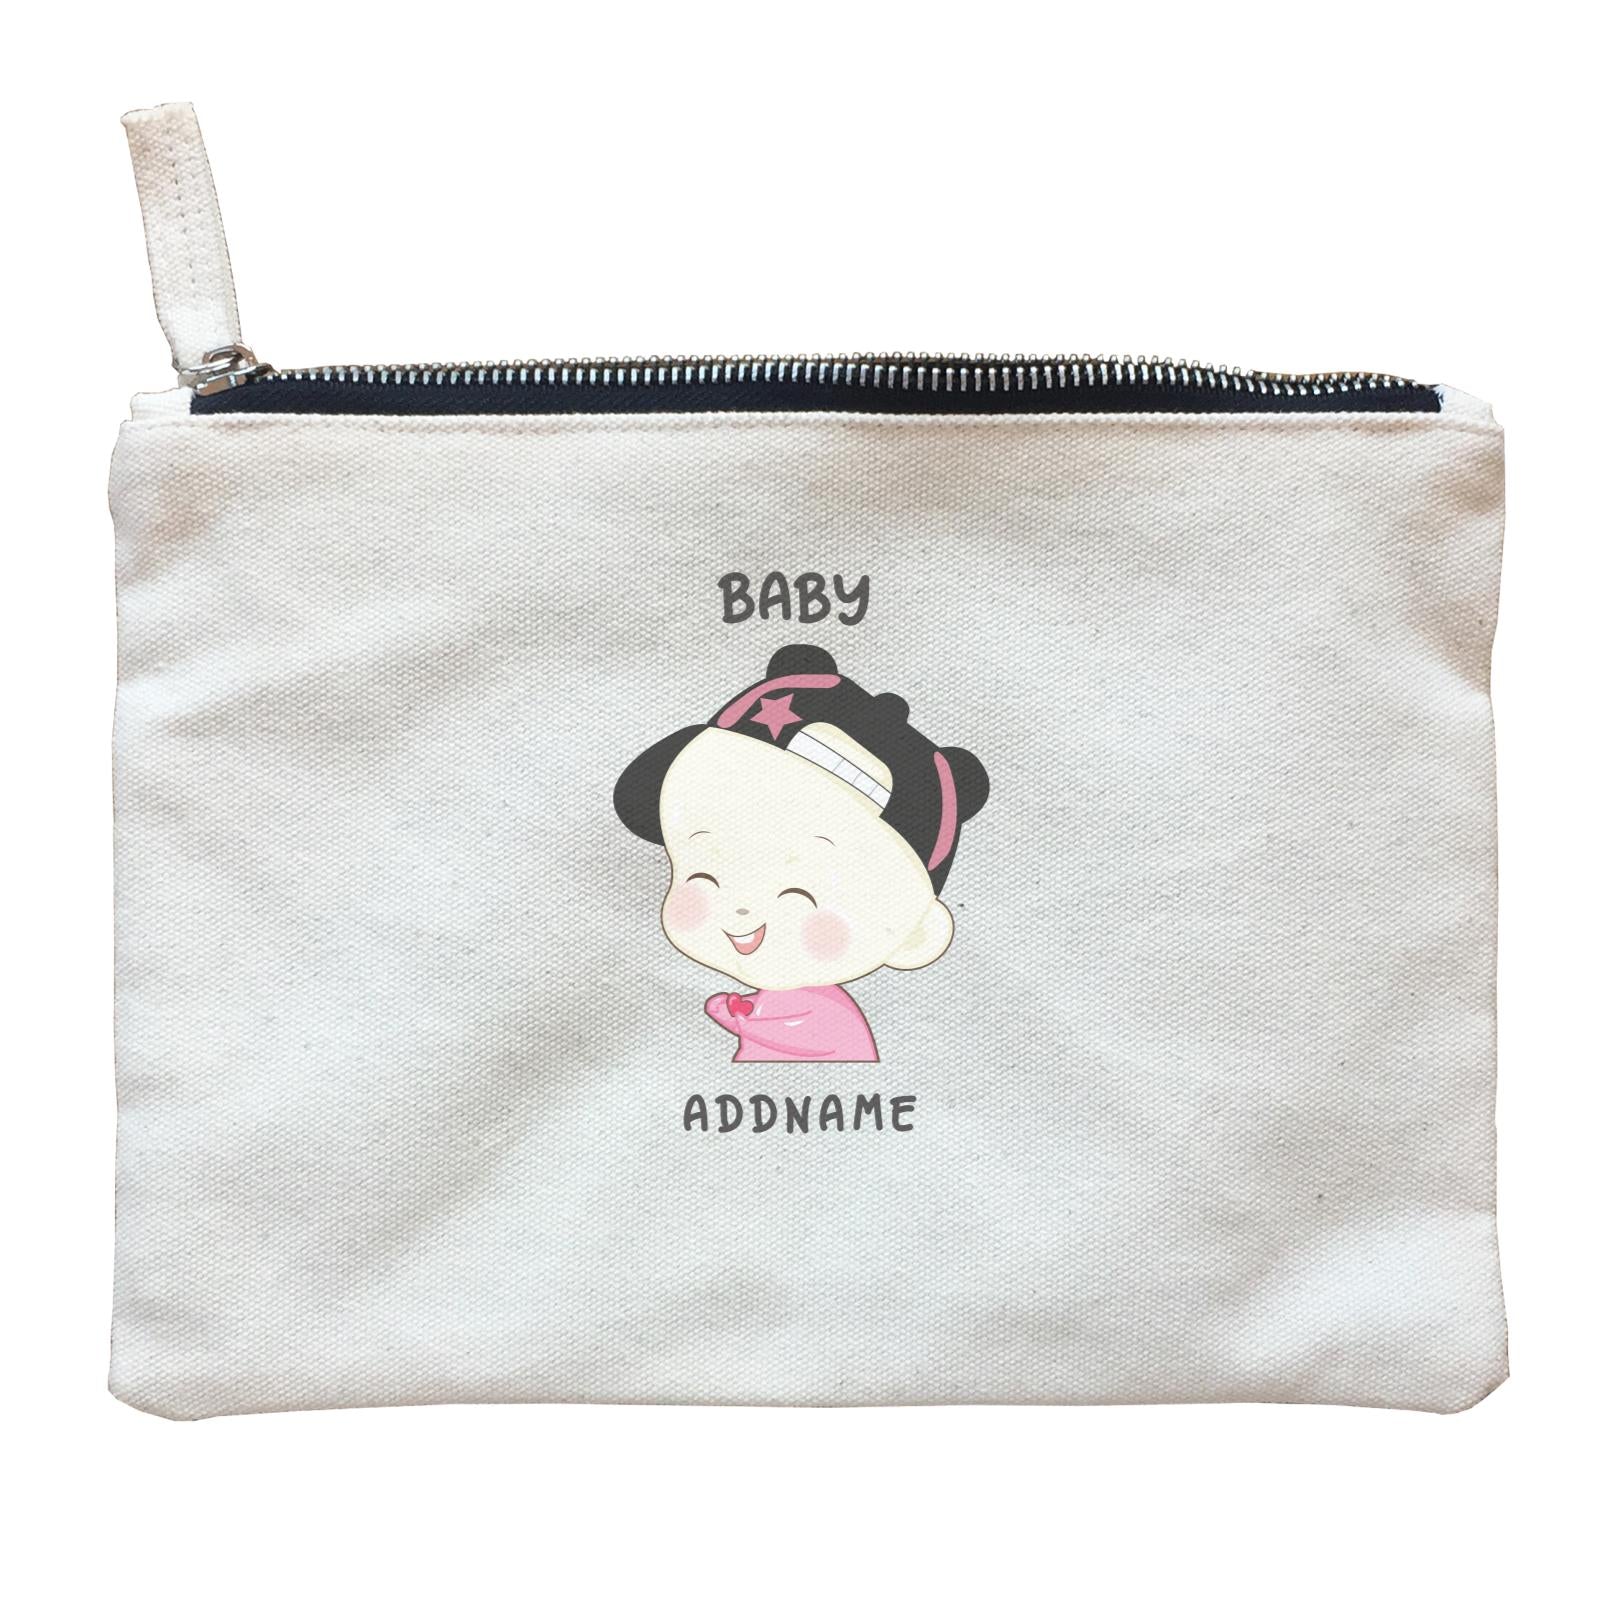 My Lovely Family Series Baby Girl Addname Zipper Pouch